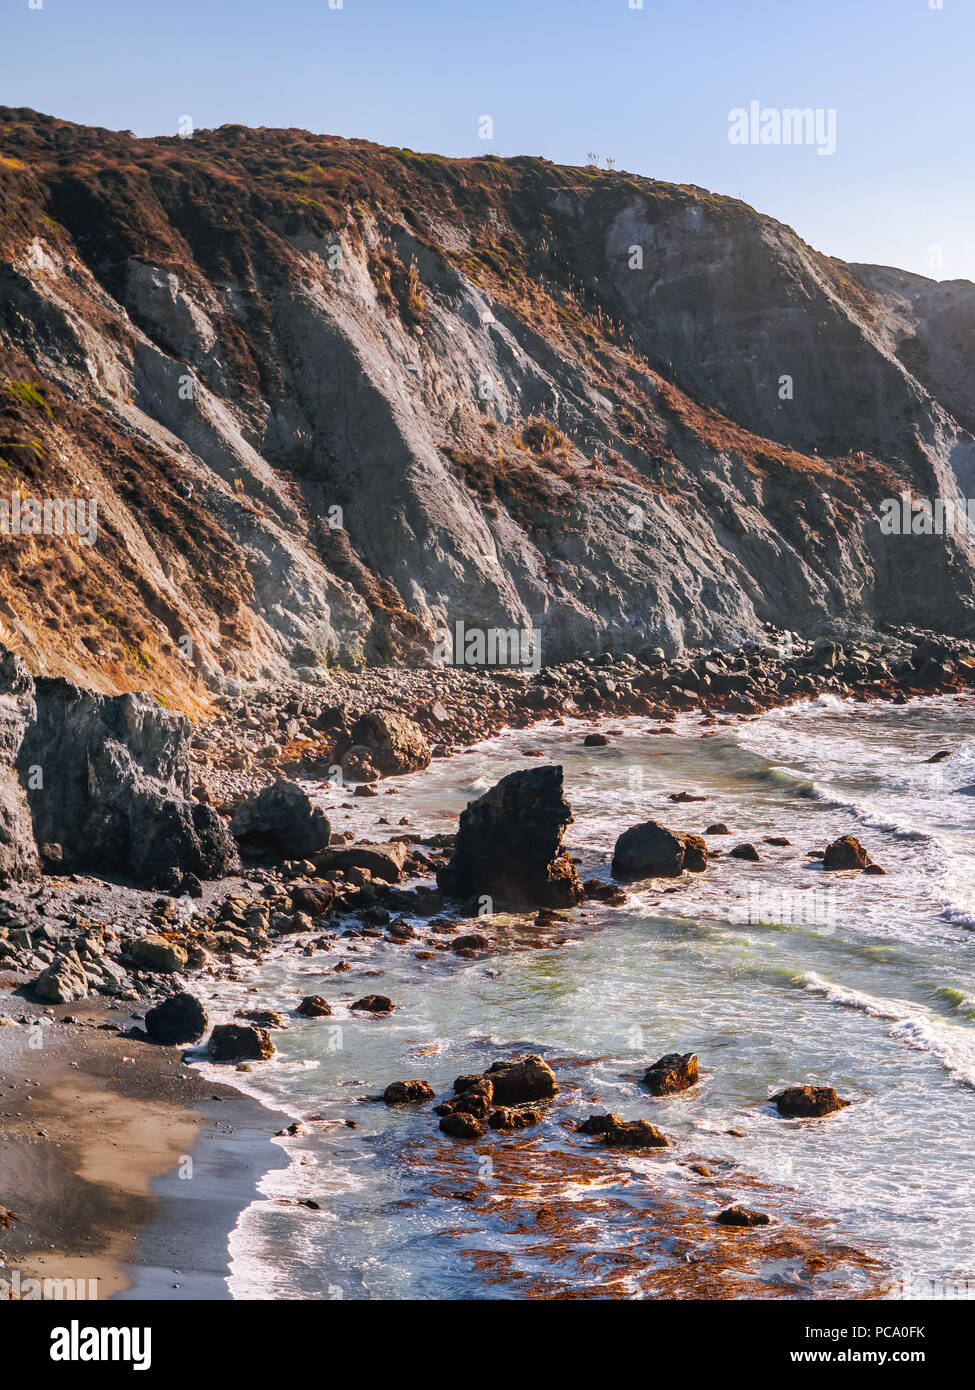 Scenic coastline along the Pacific Coast near Big Sur, California. Ocean waves crashing down on steep cliffs of Willow Creek Beach in early evening. Stock Photo